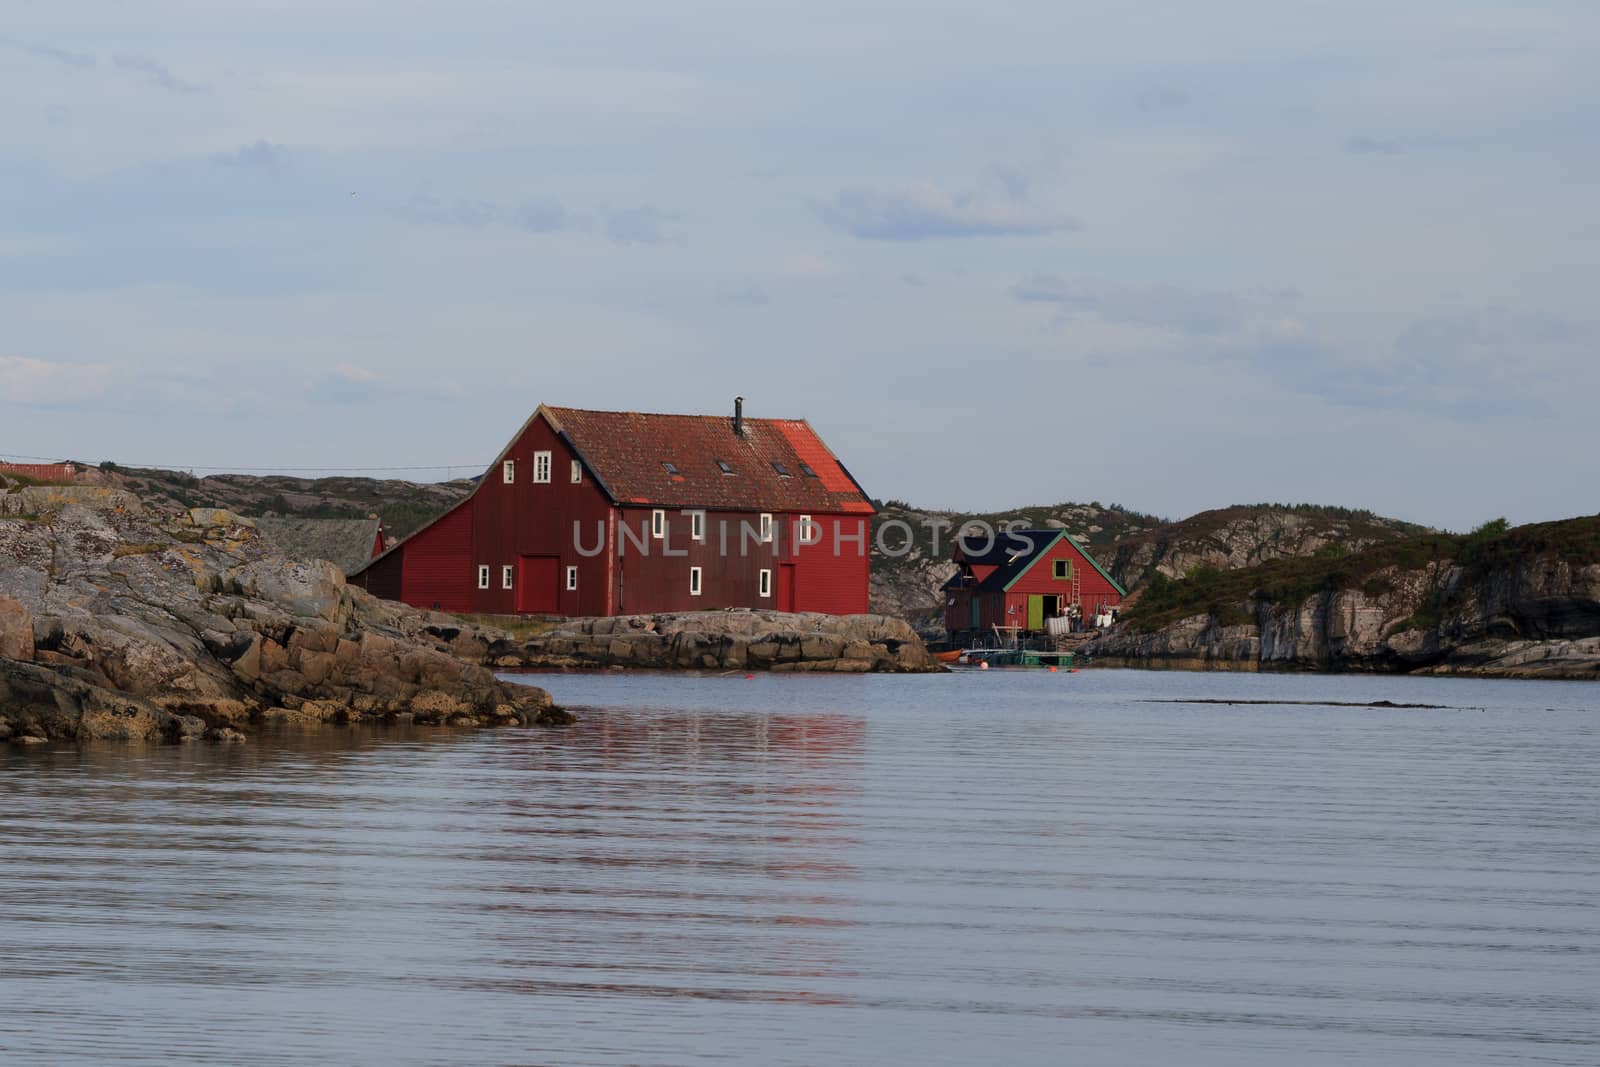 A boat House in the archipelago by SveinOttoJacobsen